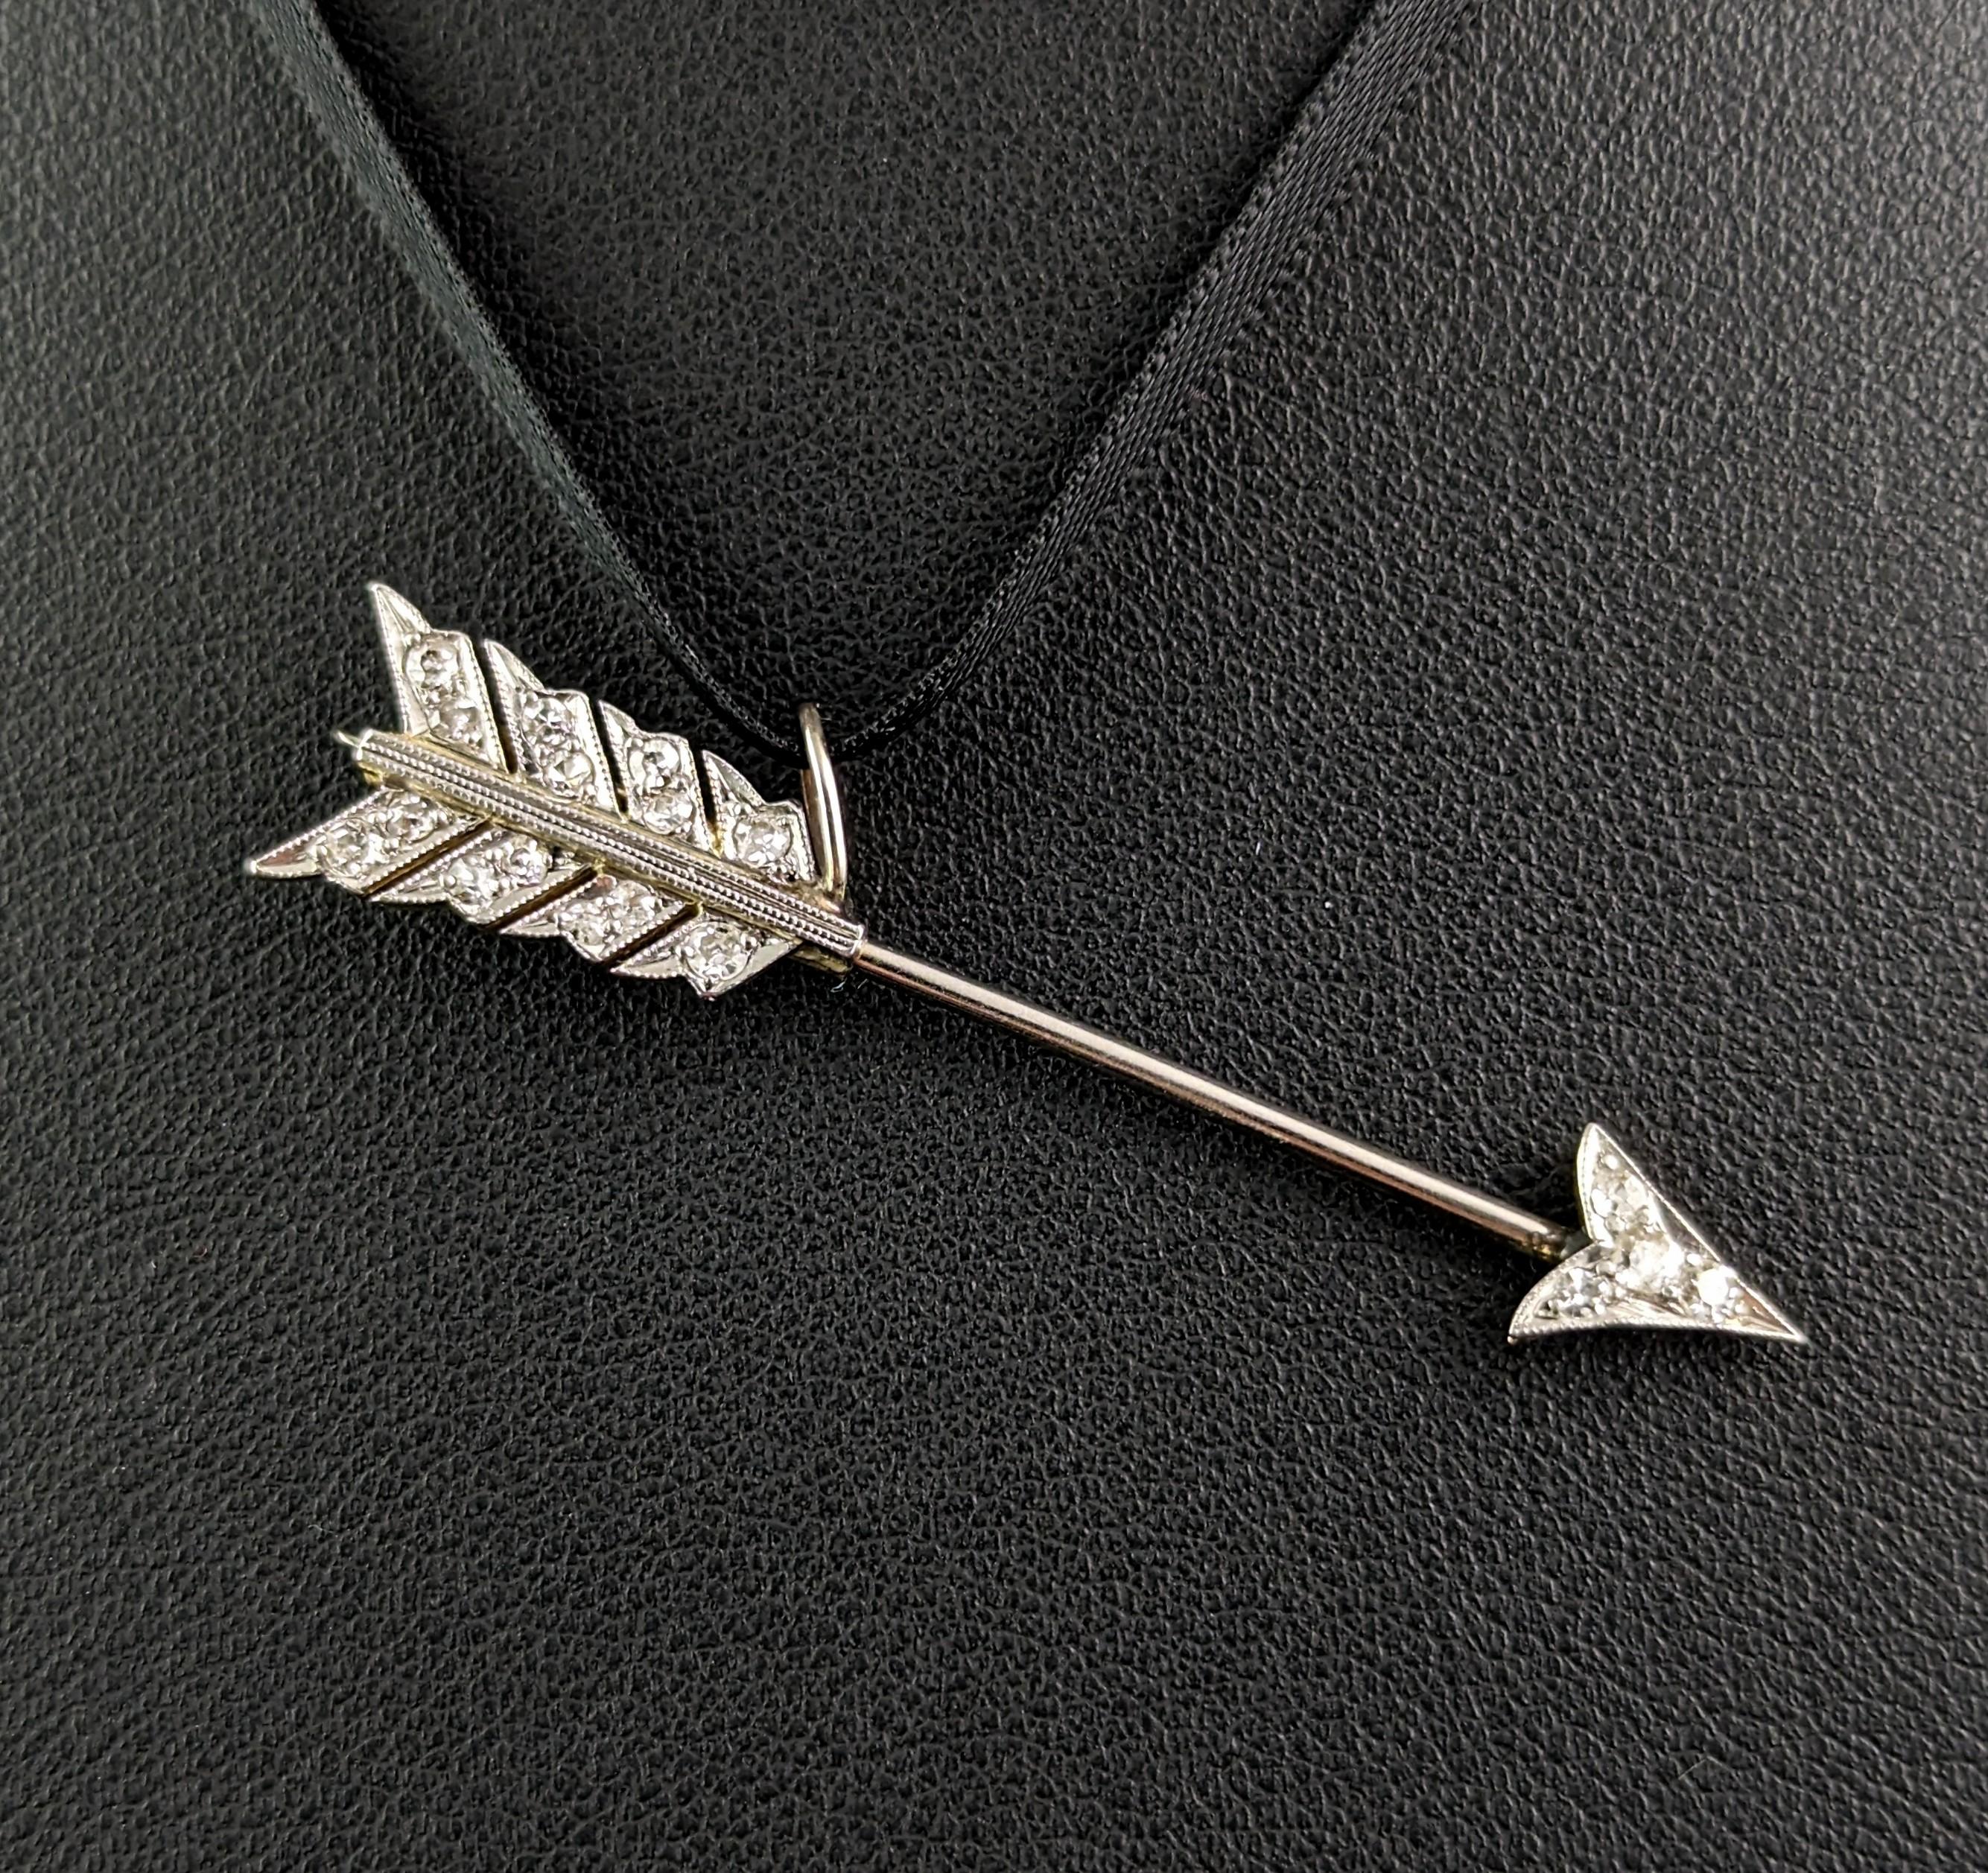 You can't go wrong with this wonderful antique Diamond arrow pendant!

It is a conversion piece, converted from a jabot pin and it is crafted in cool platinum and 15ct yellow gold.

The pendant is studded with old cut diamonds and has plenty of